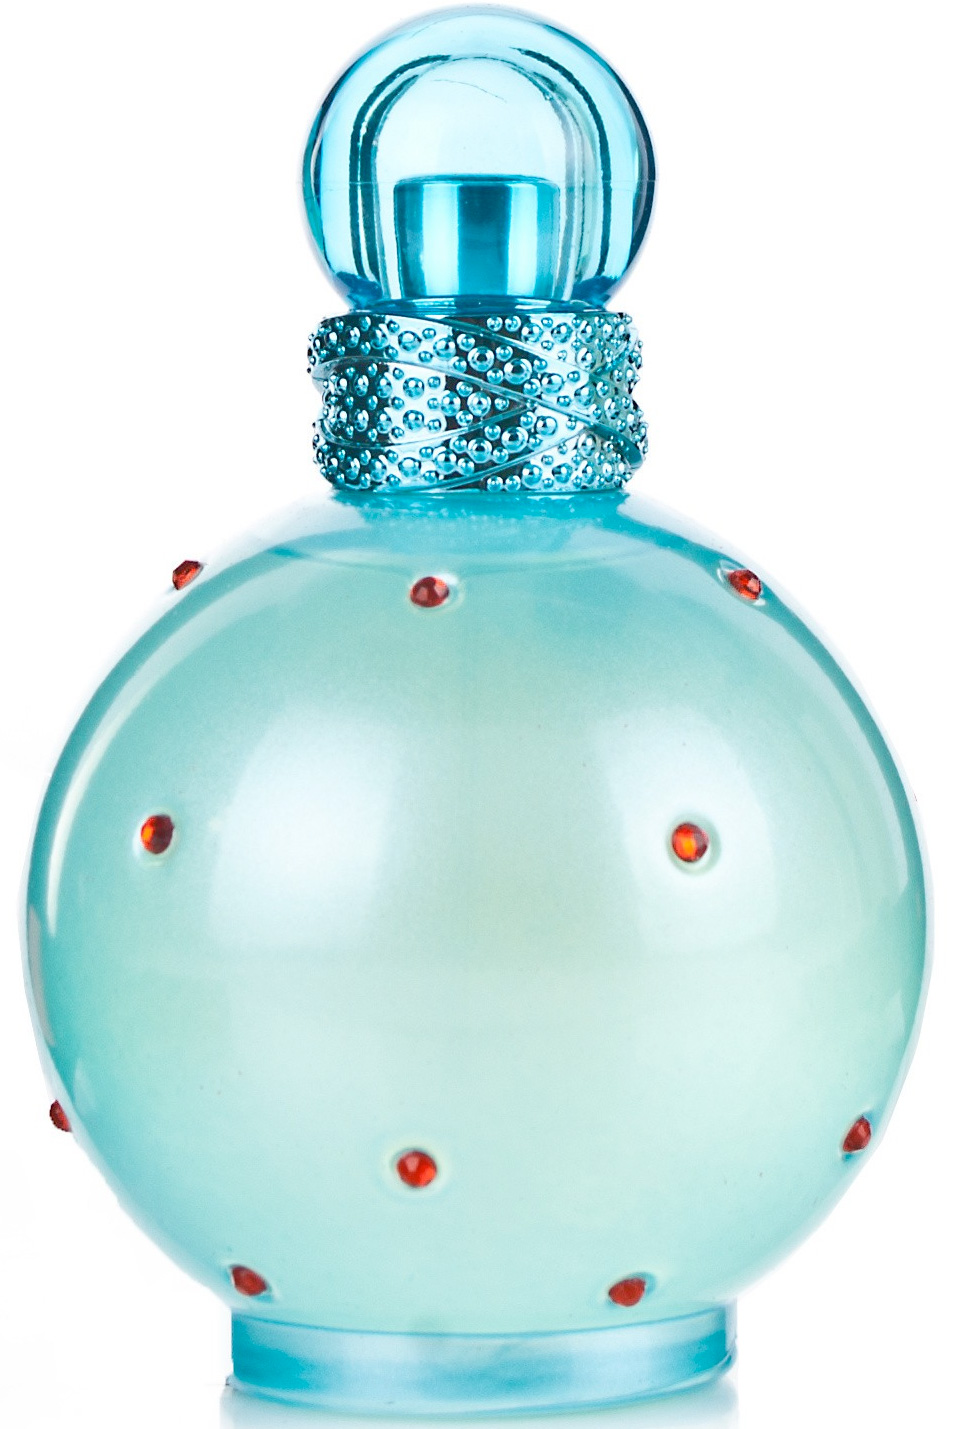 Circus Fantasy Britney Spears perfume  a fragrance for women 2009